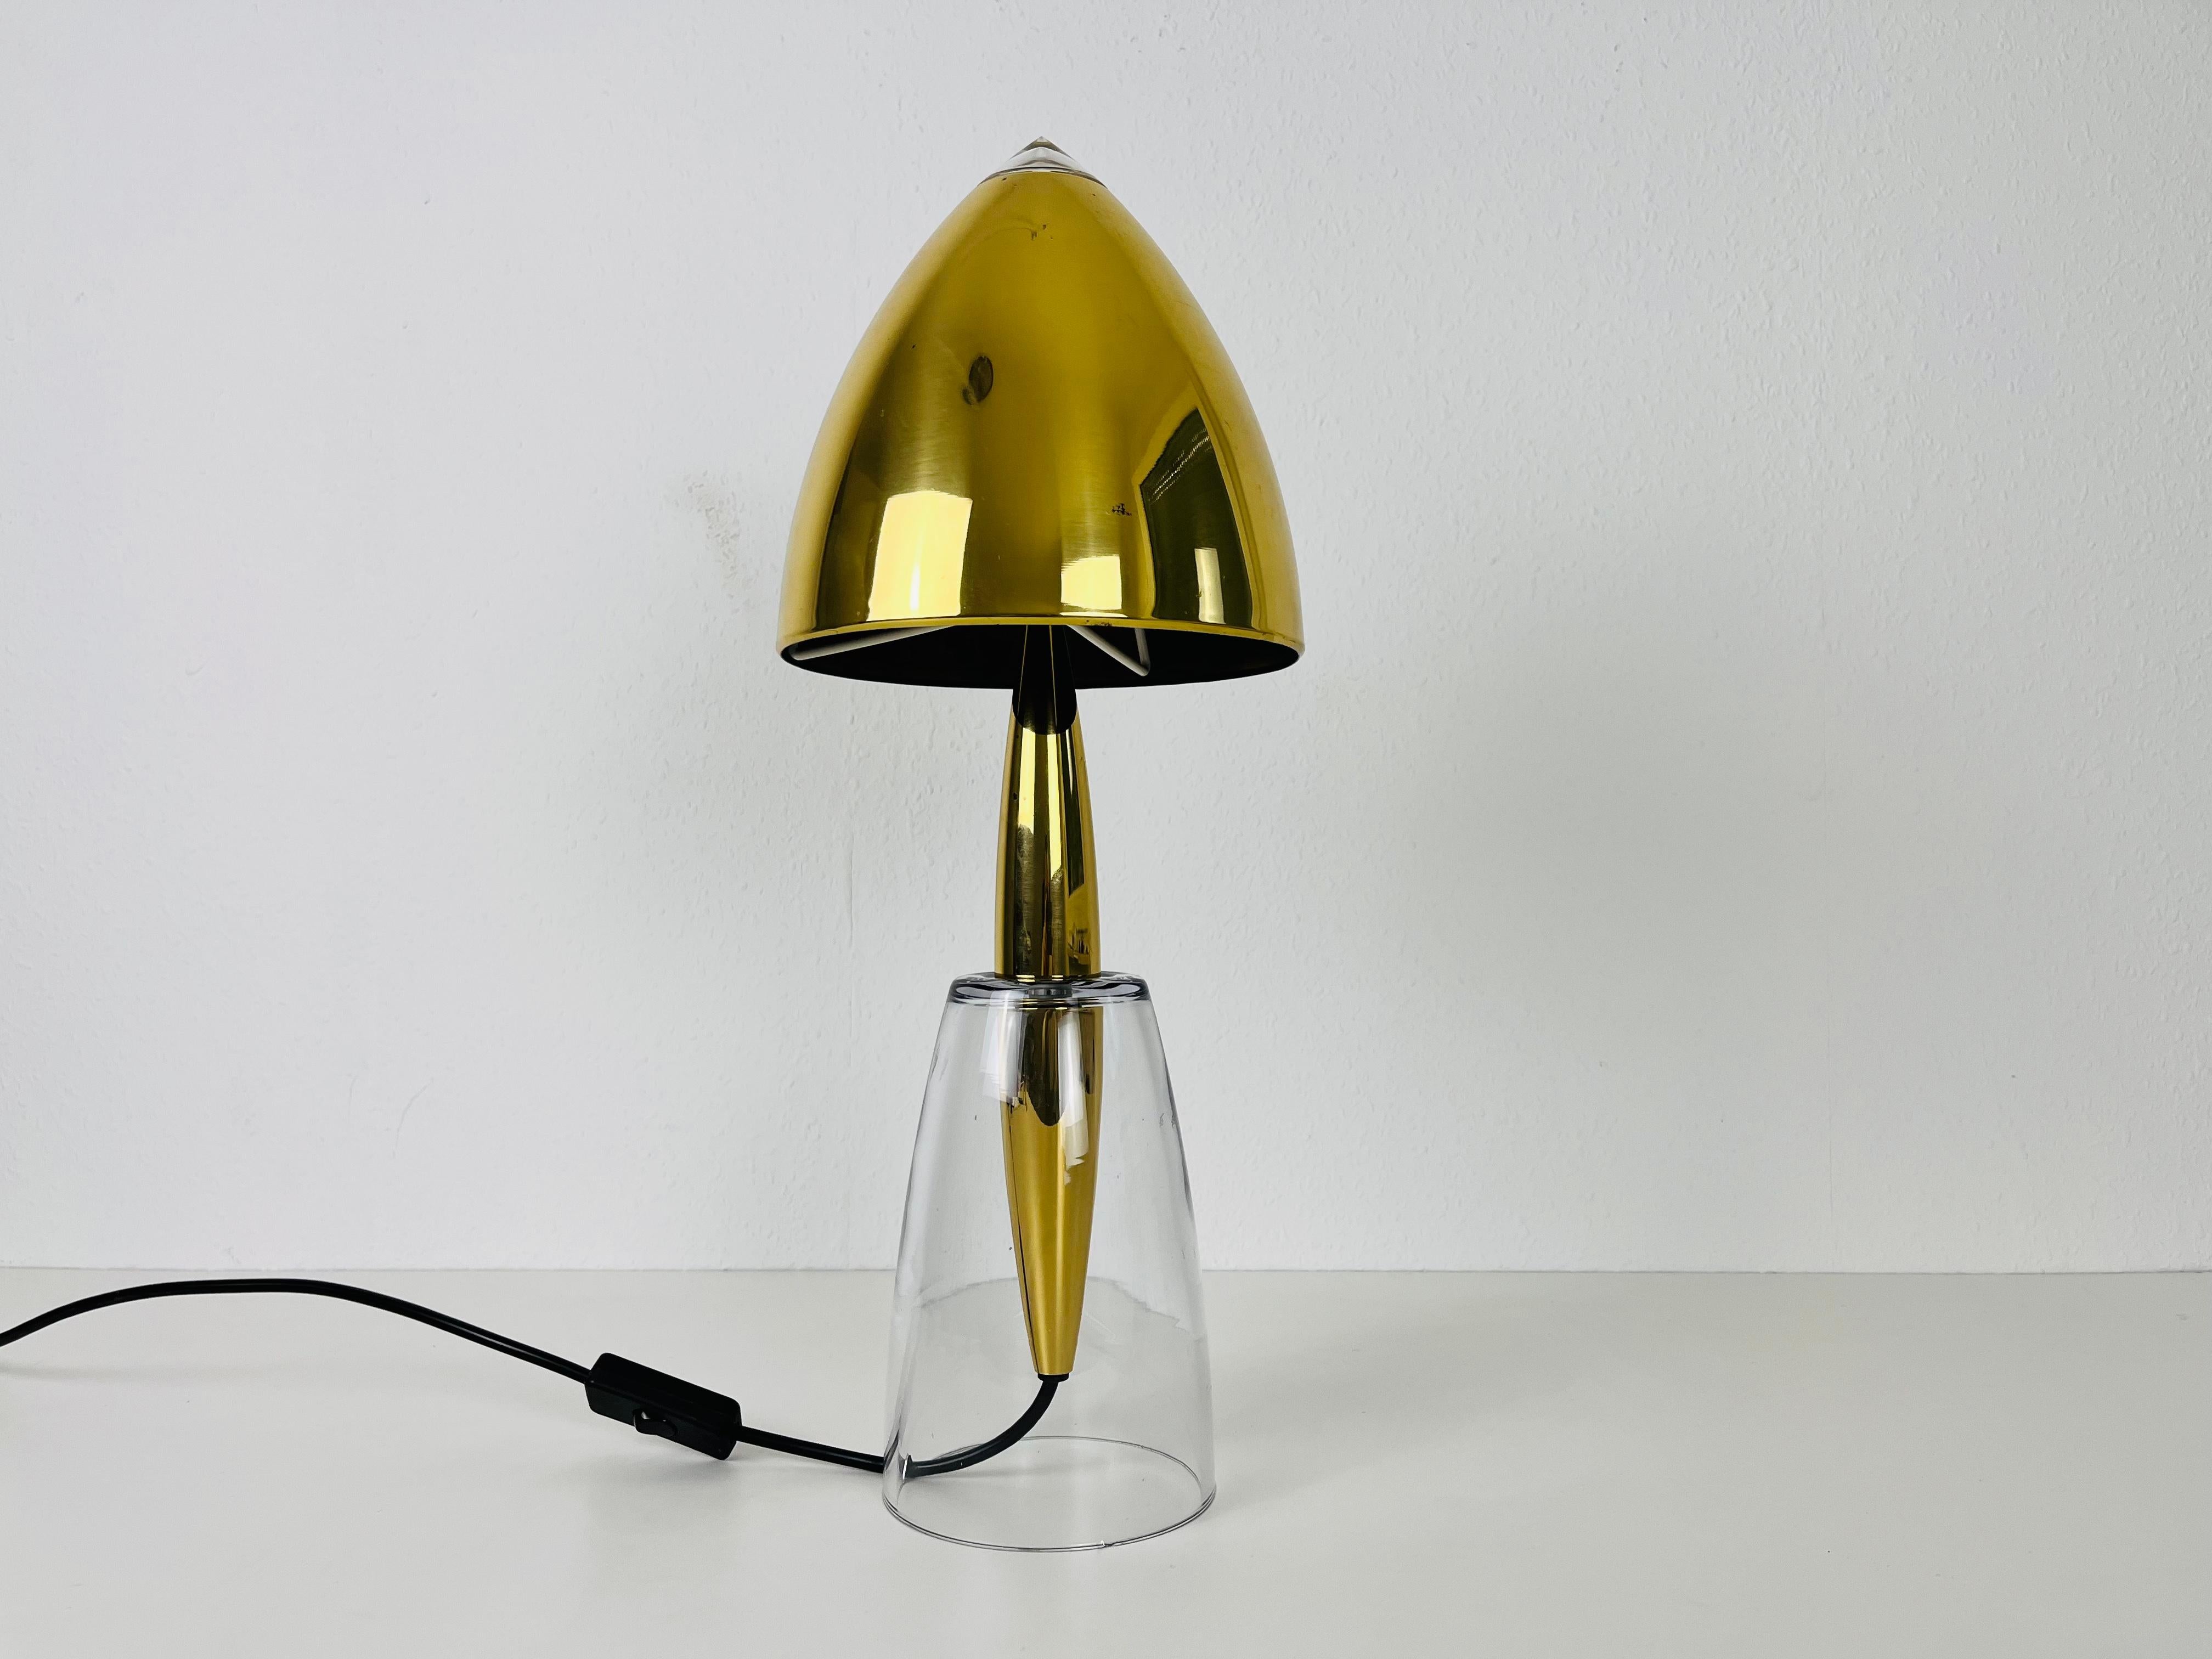 A beautiful large table lamp made in the 1960s. The base is made of solid glass. The lamp shade is made of brass

The light requires one E27 light bulb. Works with both 120/220 V. Good vintage condition.

Free worldwide express shipping.